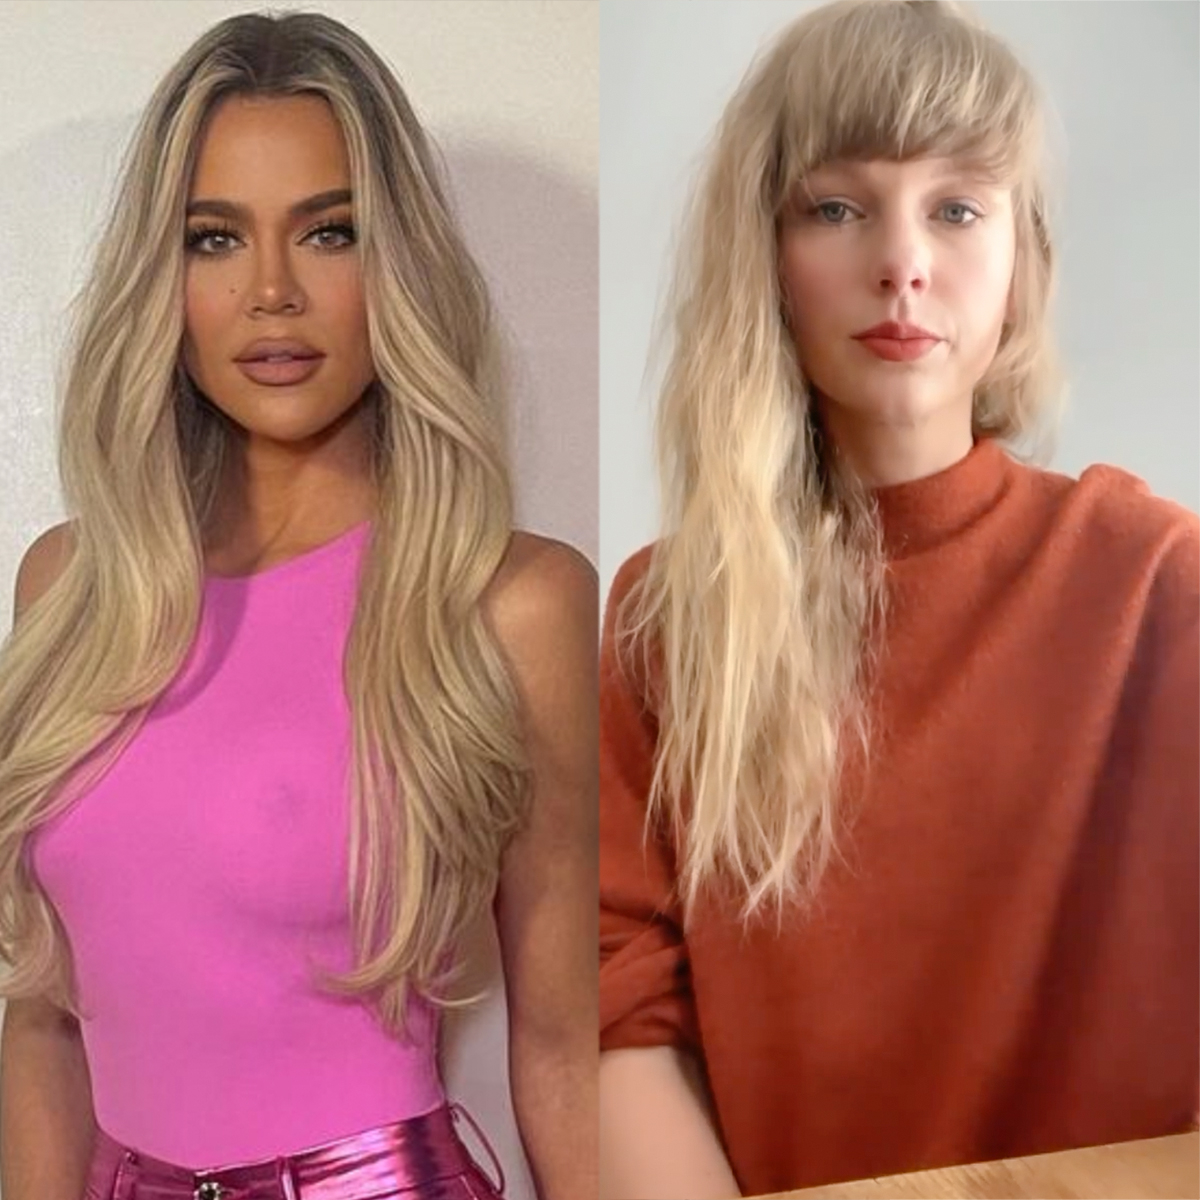 Khloe Kardashian Reacts to Meme About Taylor Swift’s Private Jet Data